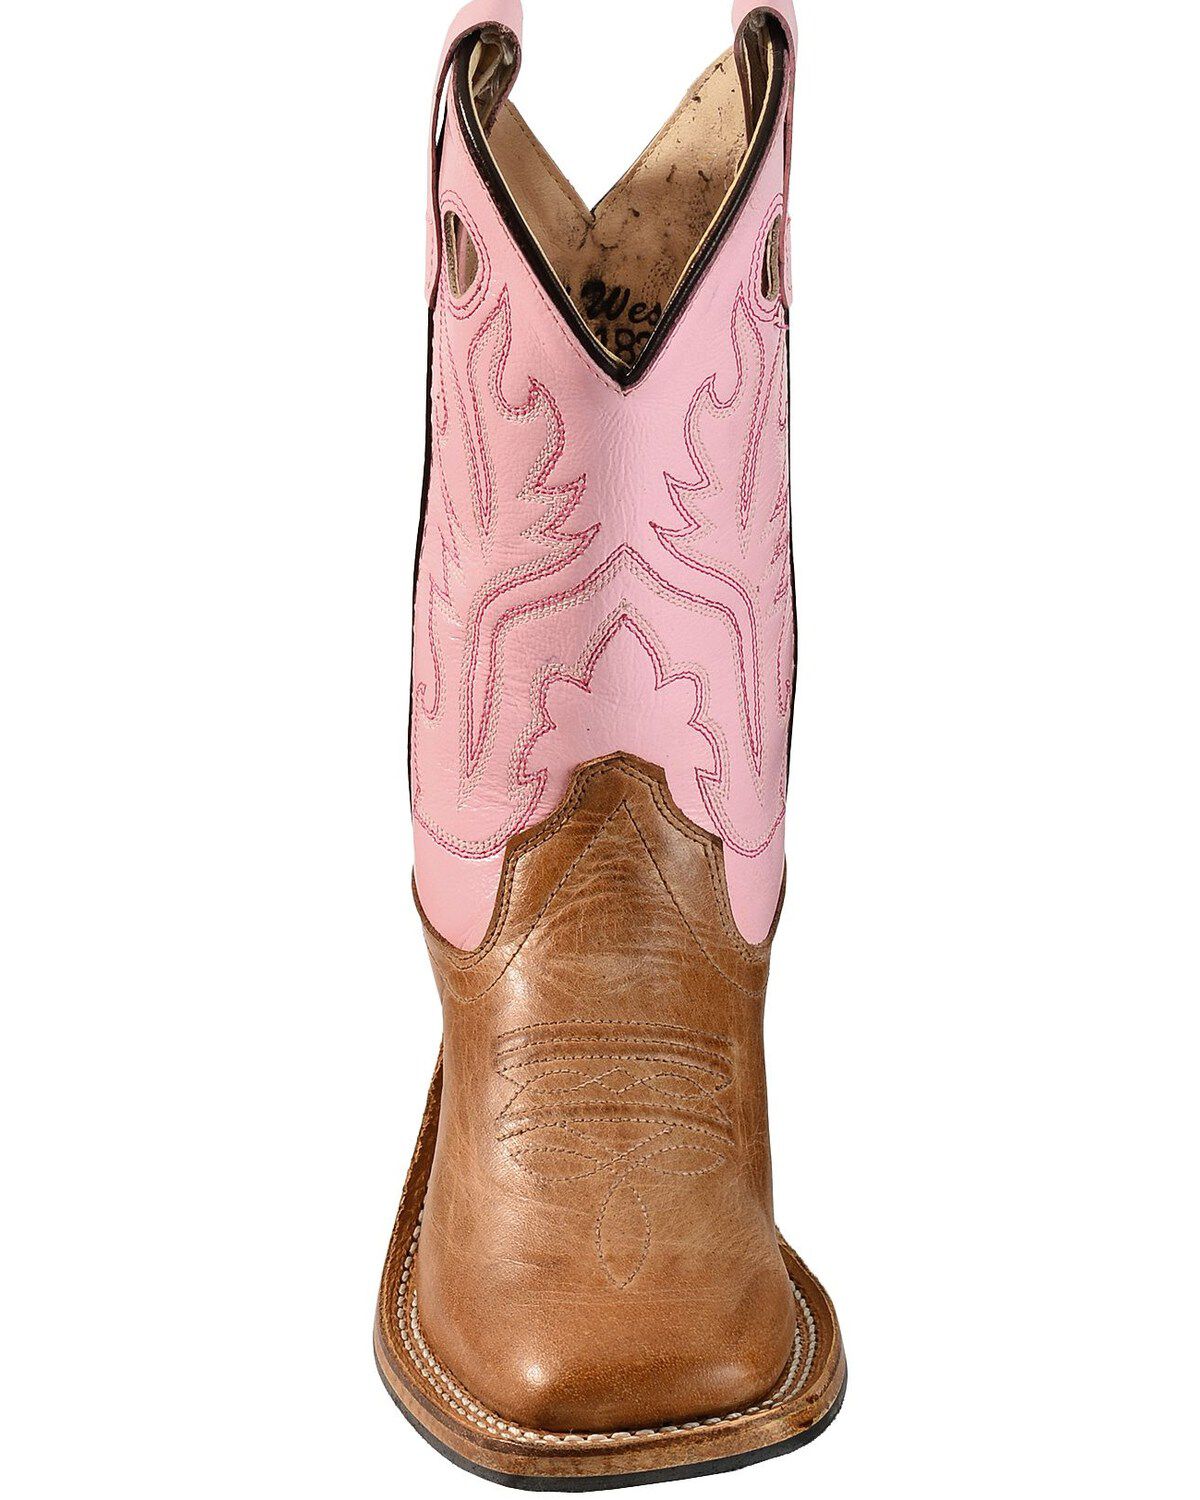 OLD WEST YOUTH GIRLS PINK WESTERN COWBOY BOOTS SIZE 2.0 NEW FAST FREE SHIPPING 